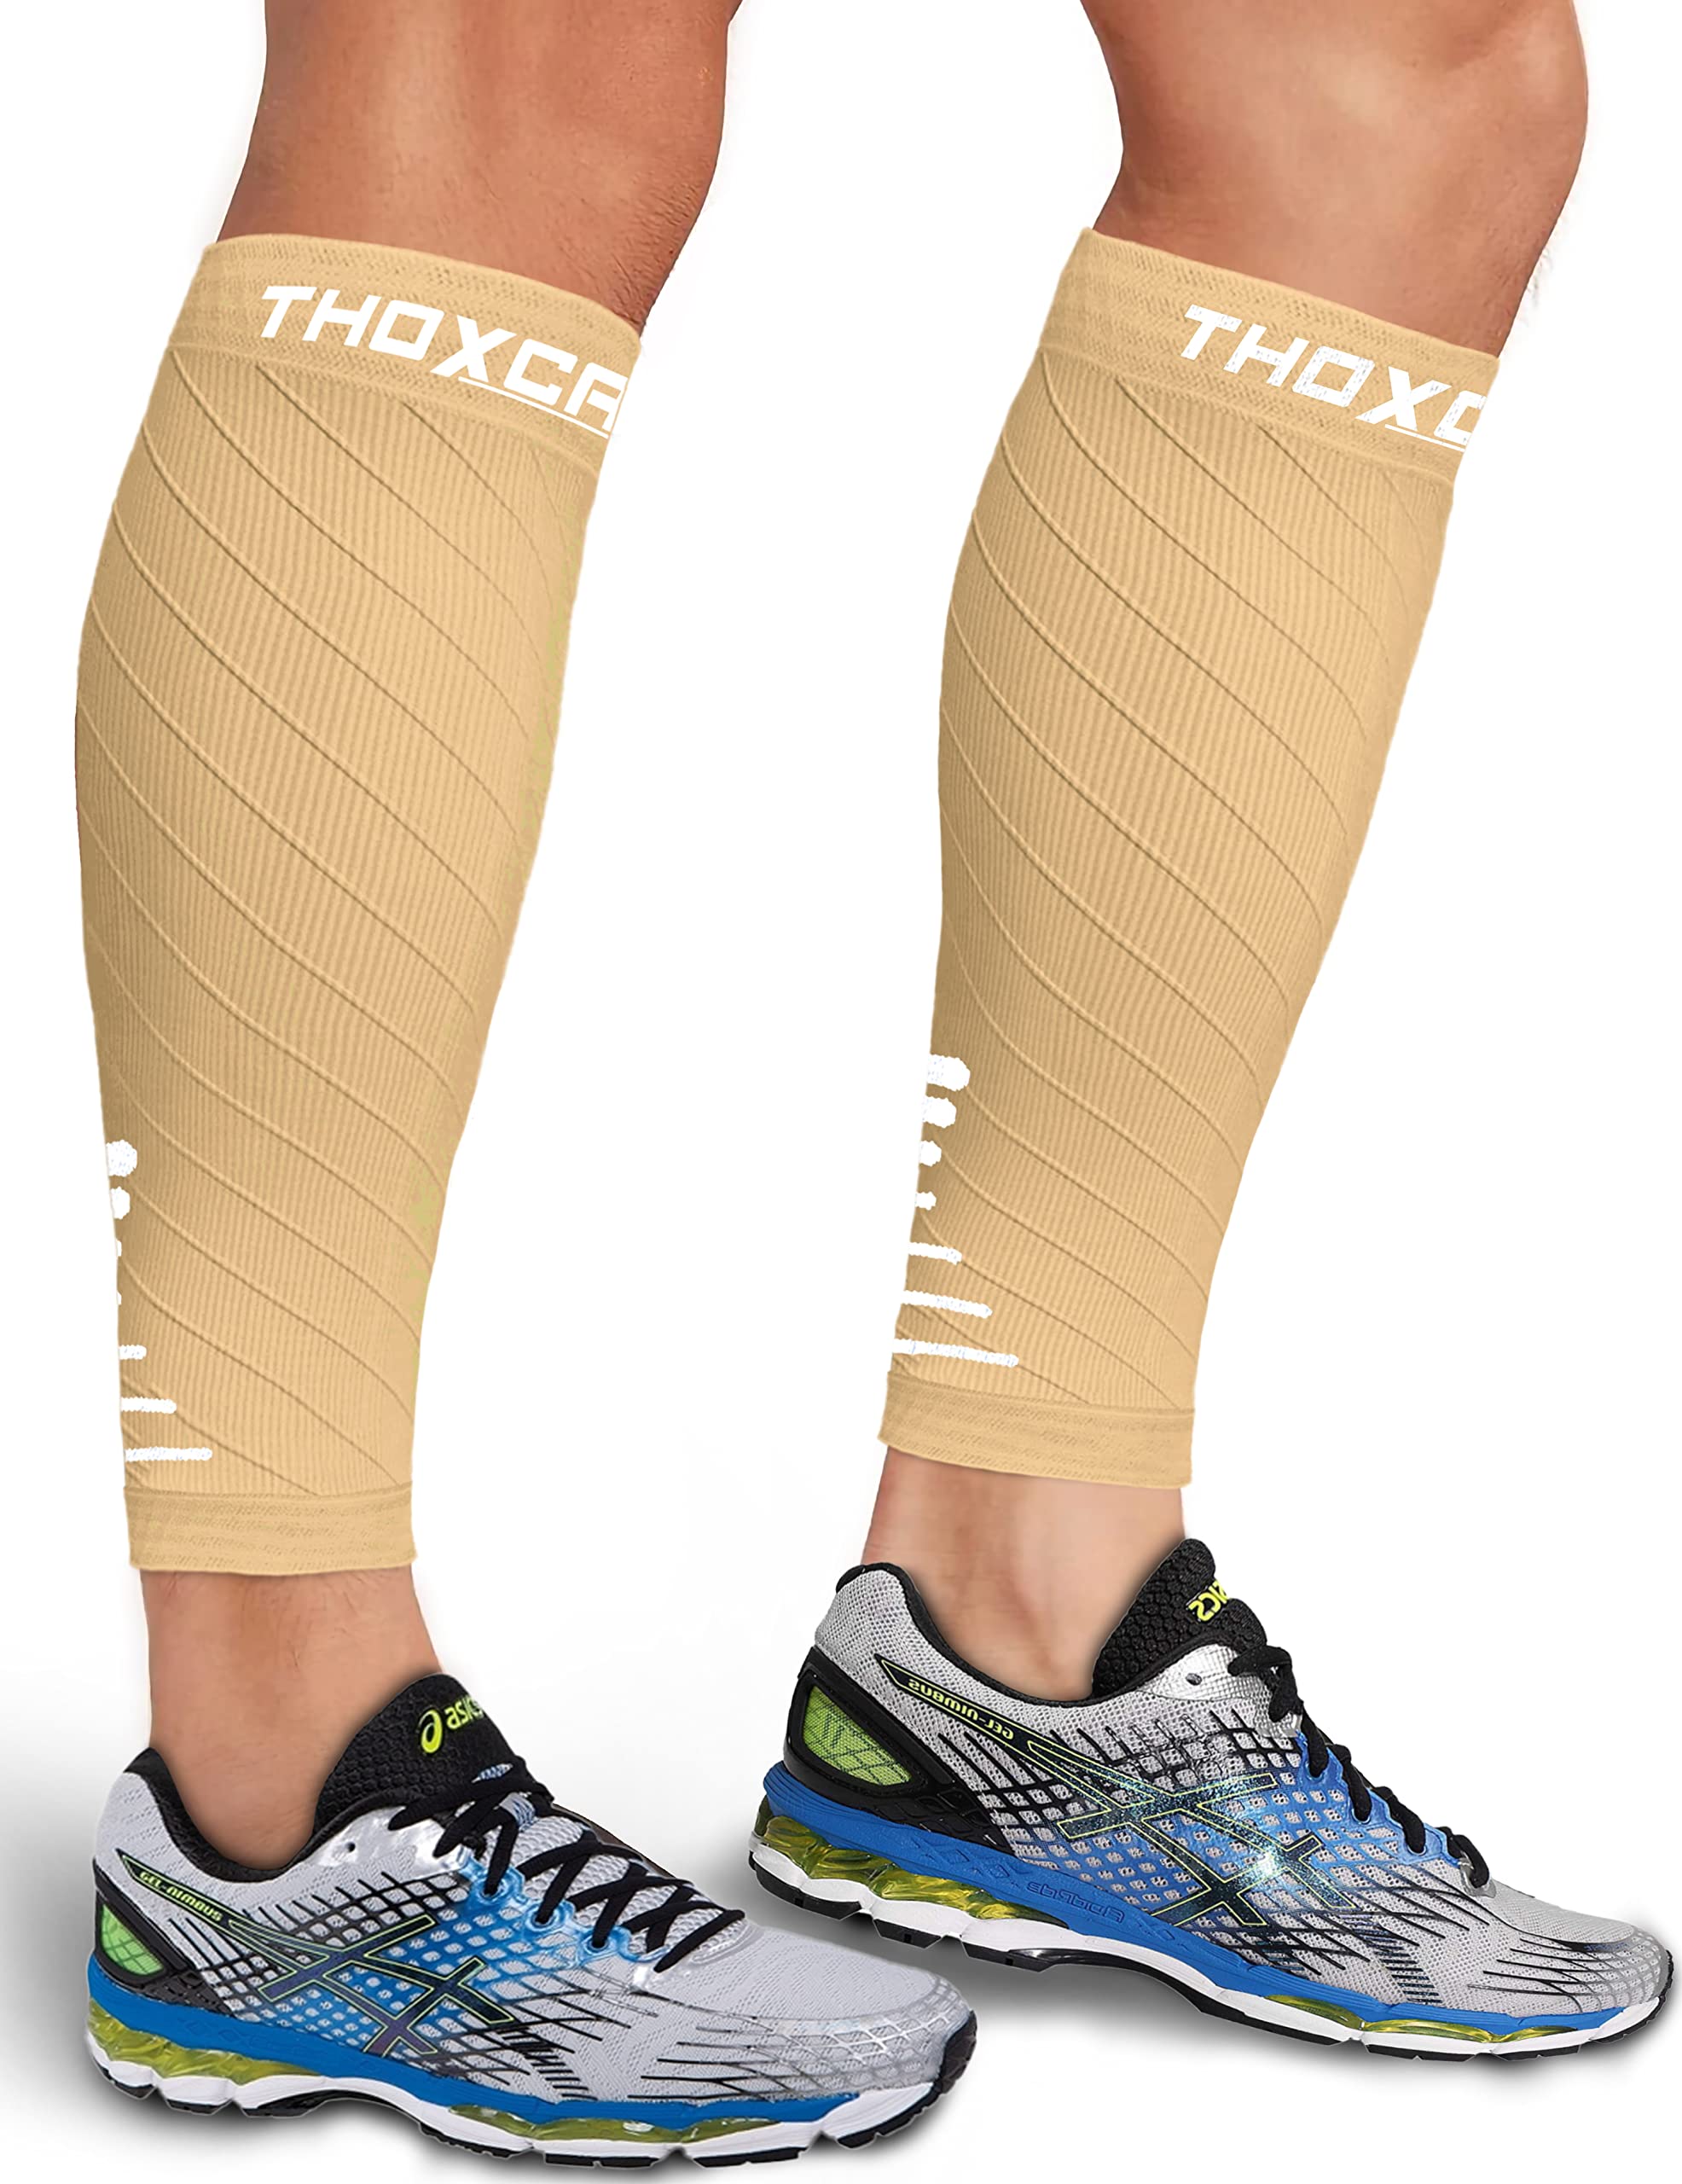 Two Pairs Calf Compression Sleeves for Men Women. Footless Compression Socks  Without Feet Shin Splints Varicose Vein Treatment for Legs & Pain Relief  Calf Braces Splints & Supports Best Wide leg Running